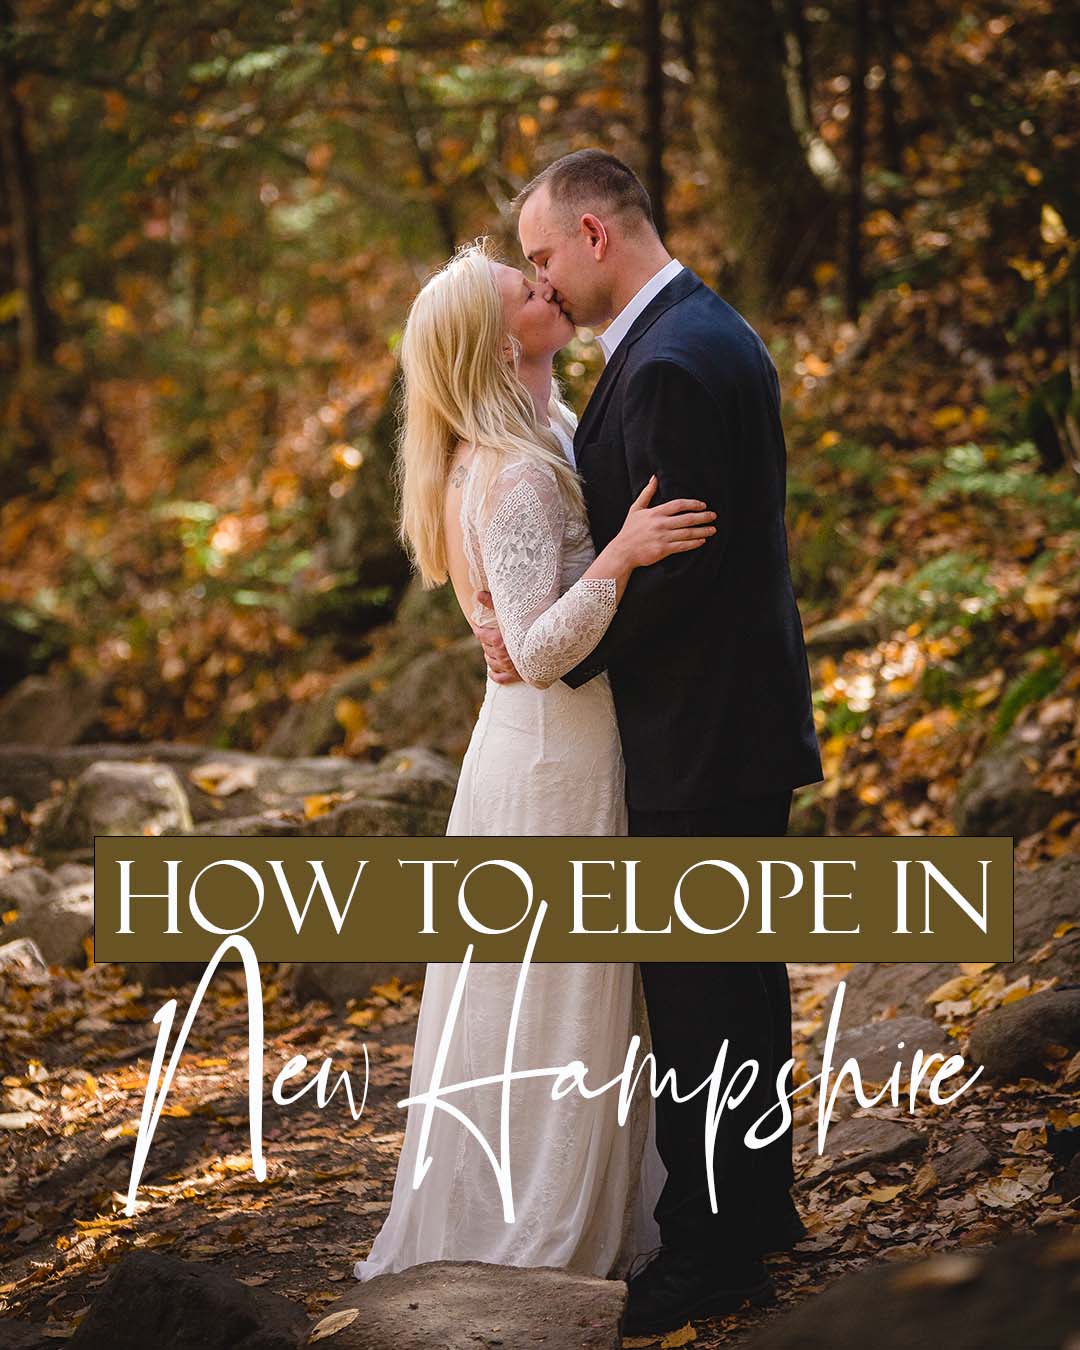 Elope NH 3 8x10 1 Elopements and non-traditional micro-weddings are on the rise! If you want to elope in New Hampshire, this post is full of elopement planning tips, as well as suggestions for some AH-mazing ideas on where to go and what to do for your elopement in NH.